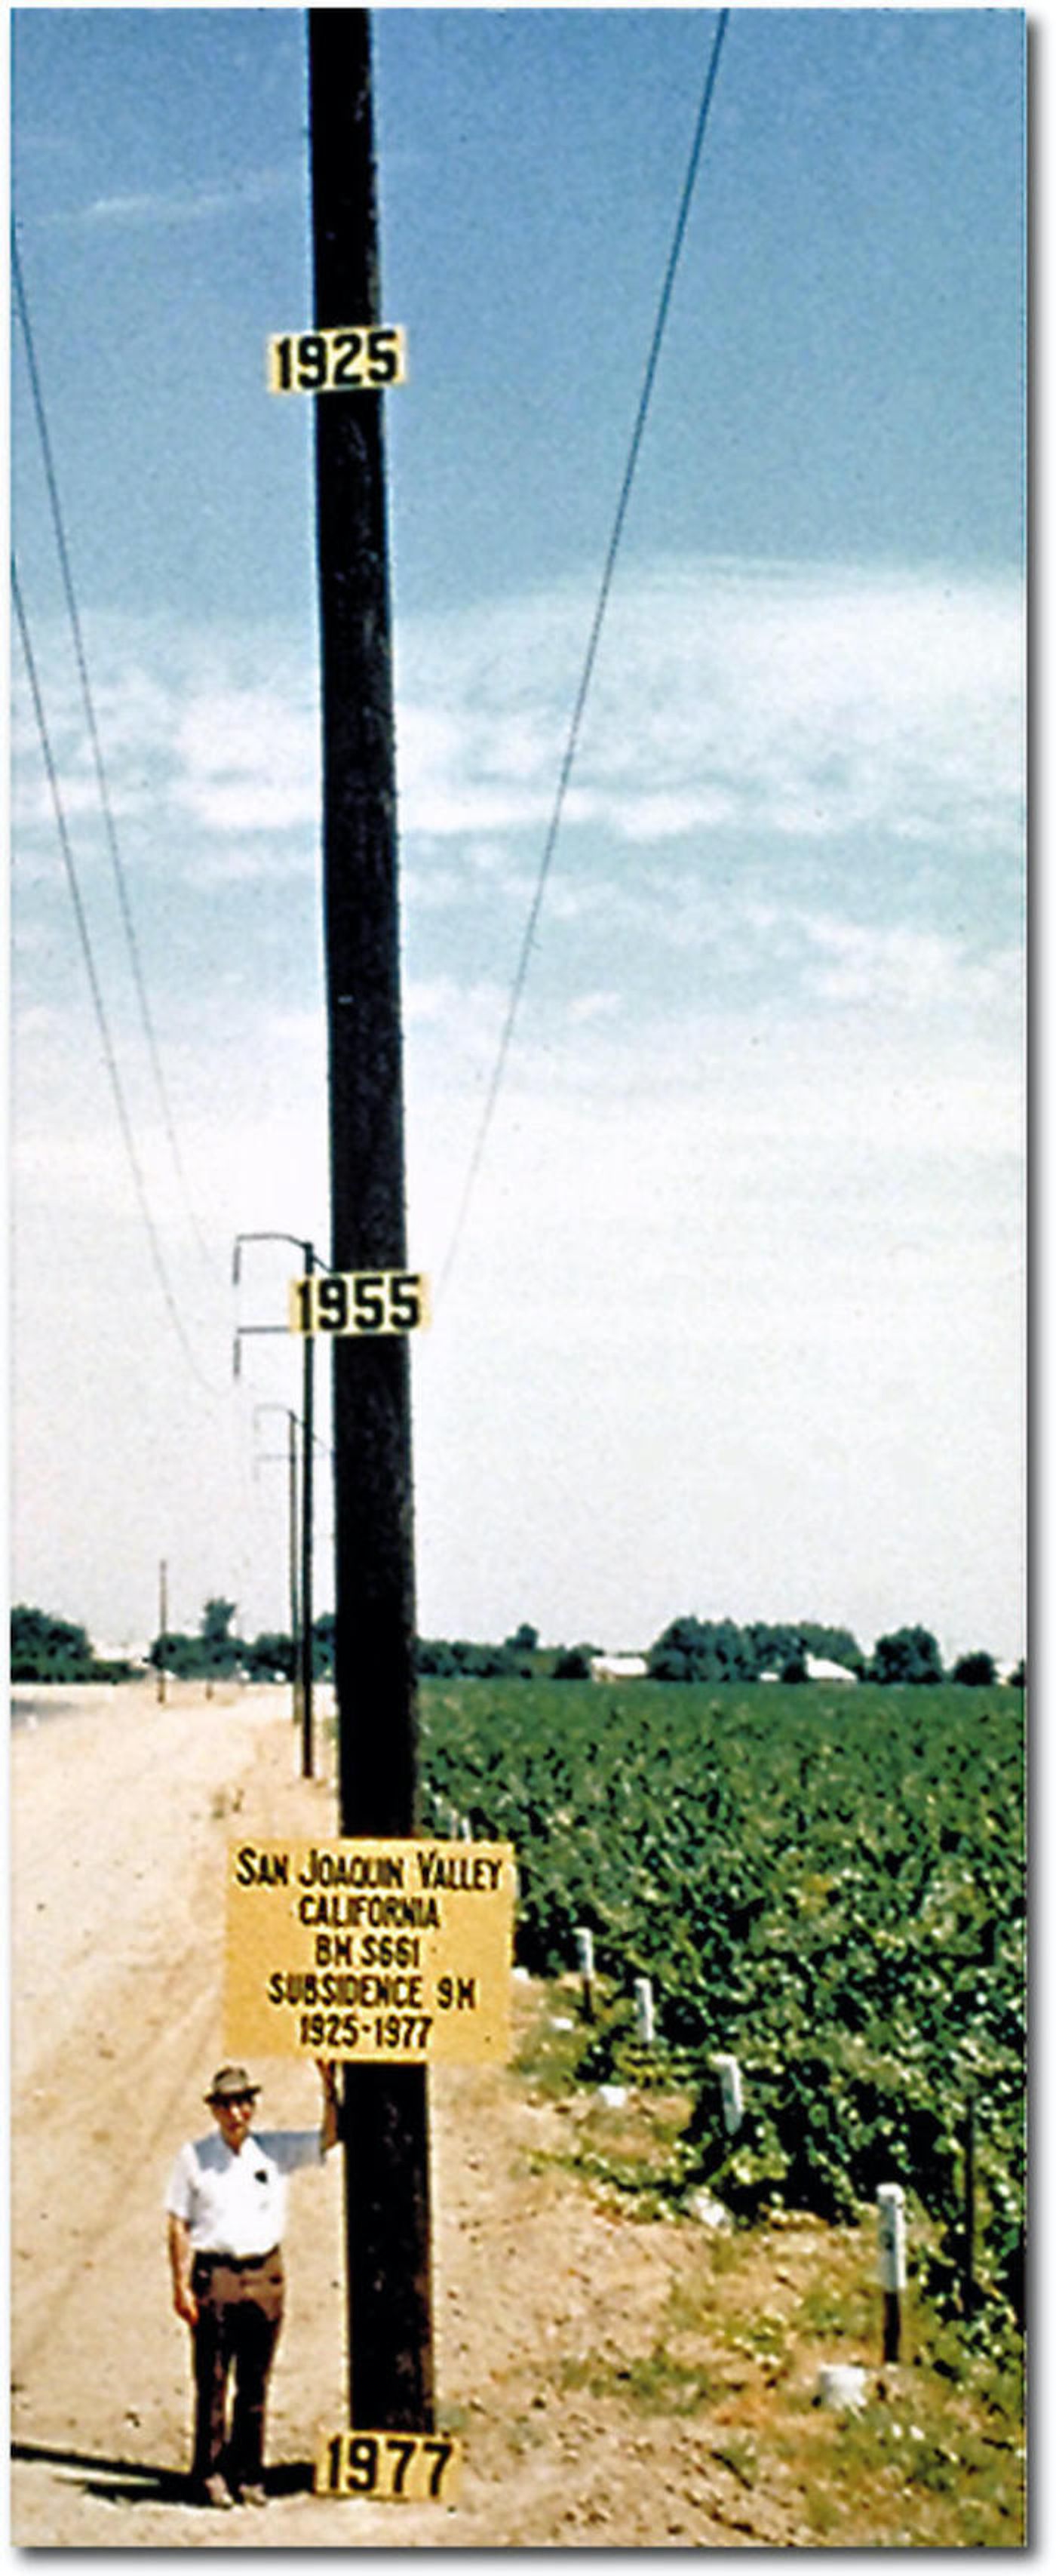 The site is in the San Joaquin Valley southwest of Mendota, California. Signs on pole show approximate altitude of land surface in 1925, 1955, and 1977. The land surface subsided about 9 meters from 1925 to 1977 due to aquifer-system compaction. / Credit: USGS